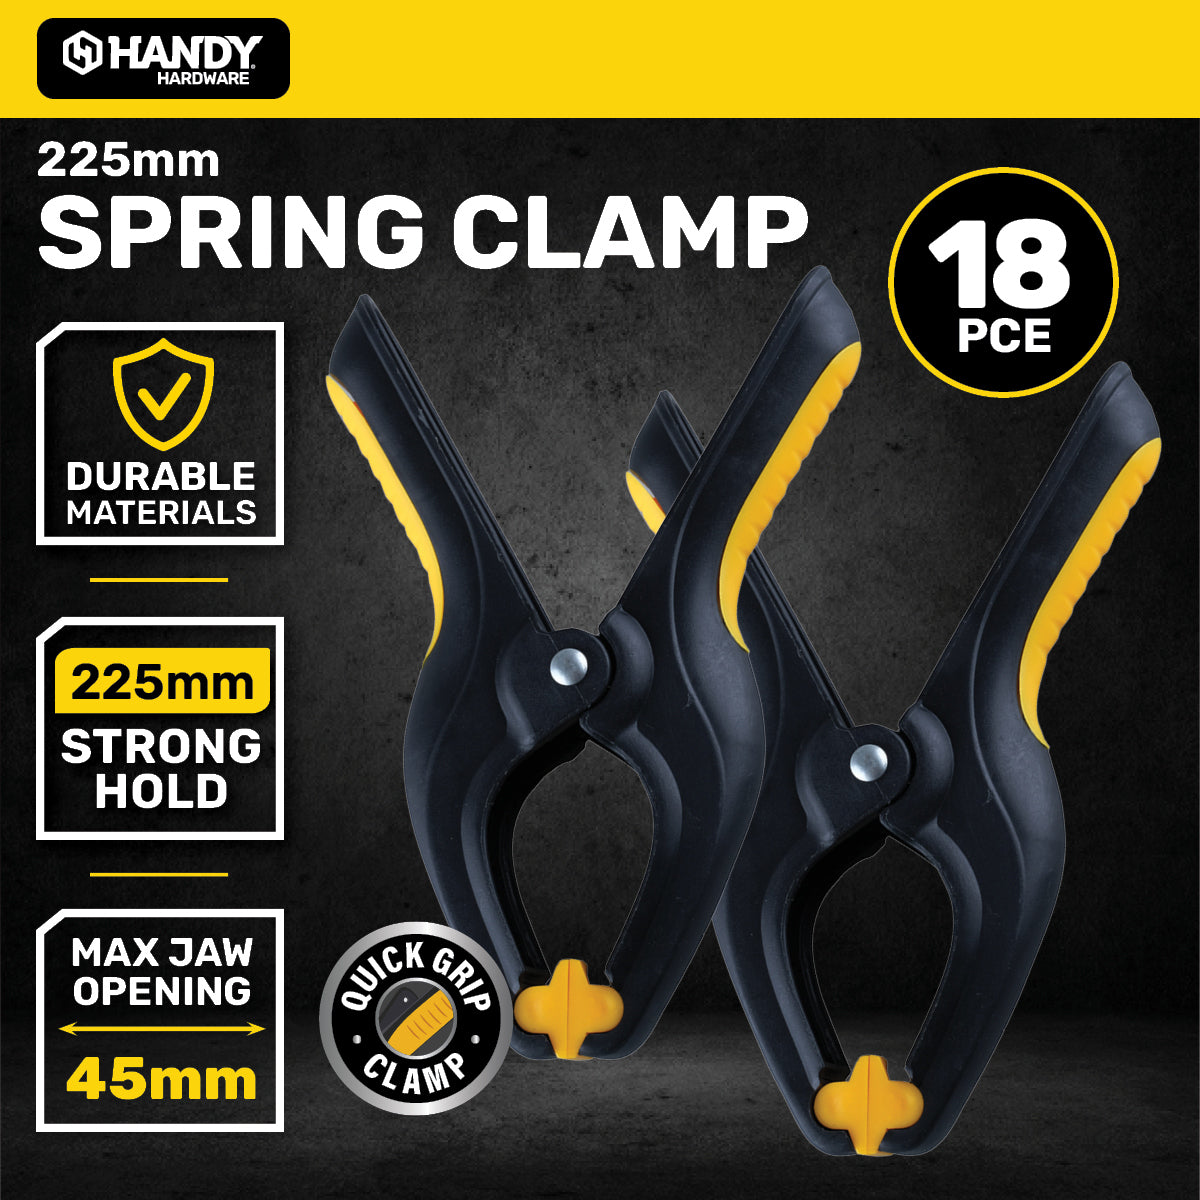 Handy Hardware 18PCE Large Spring Clamps 45mm Jaw Opening Heavy Duty 225mm